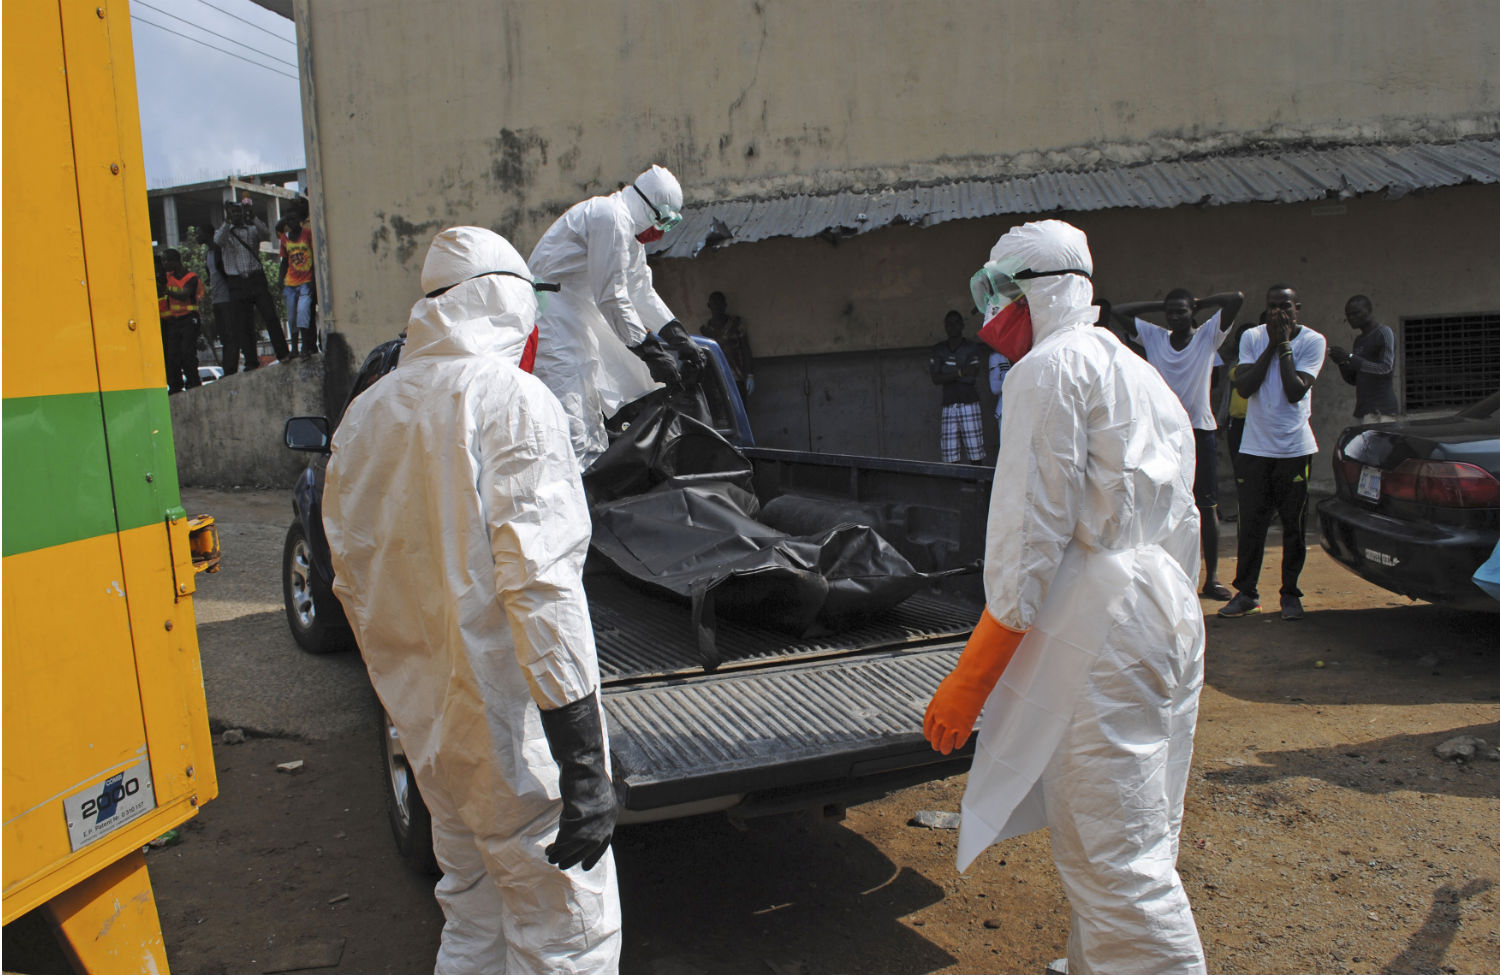 Why Are We Sending Soldiers Trained for War to Respond to the Ebola Crisis?